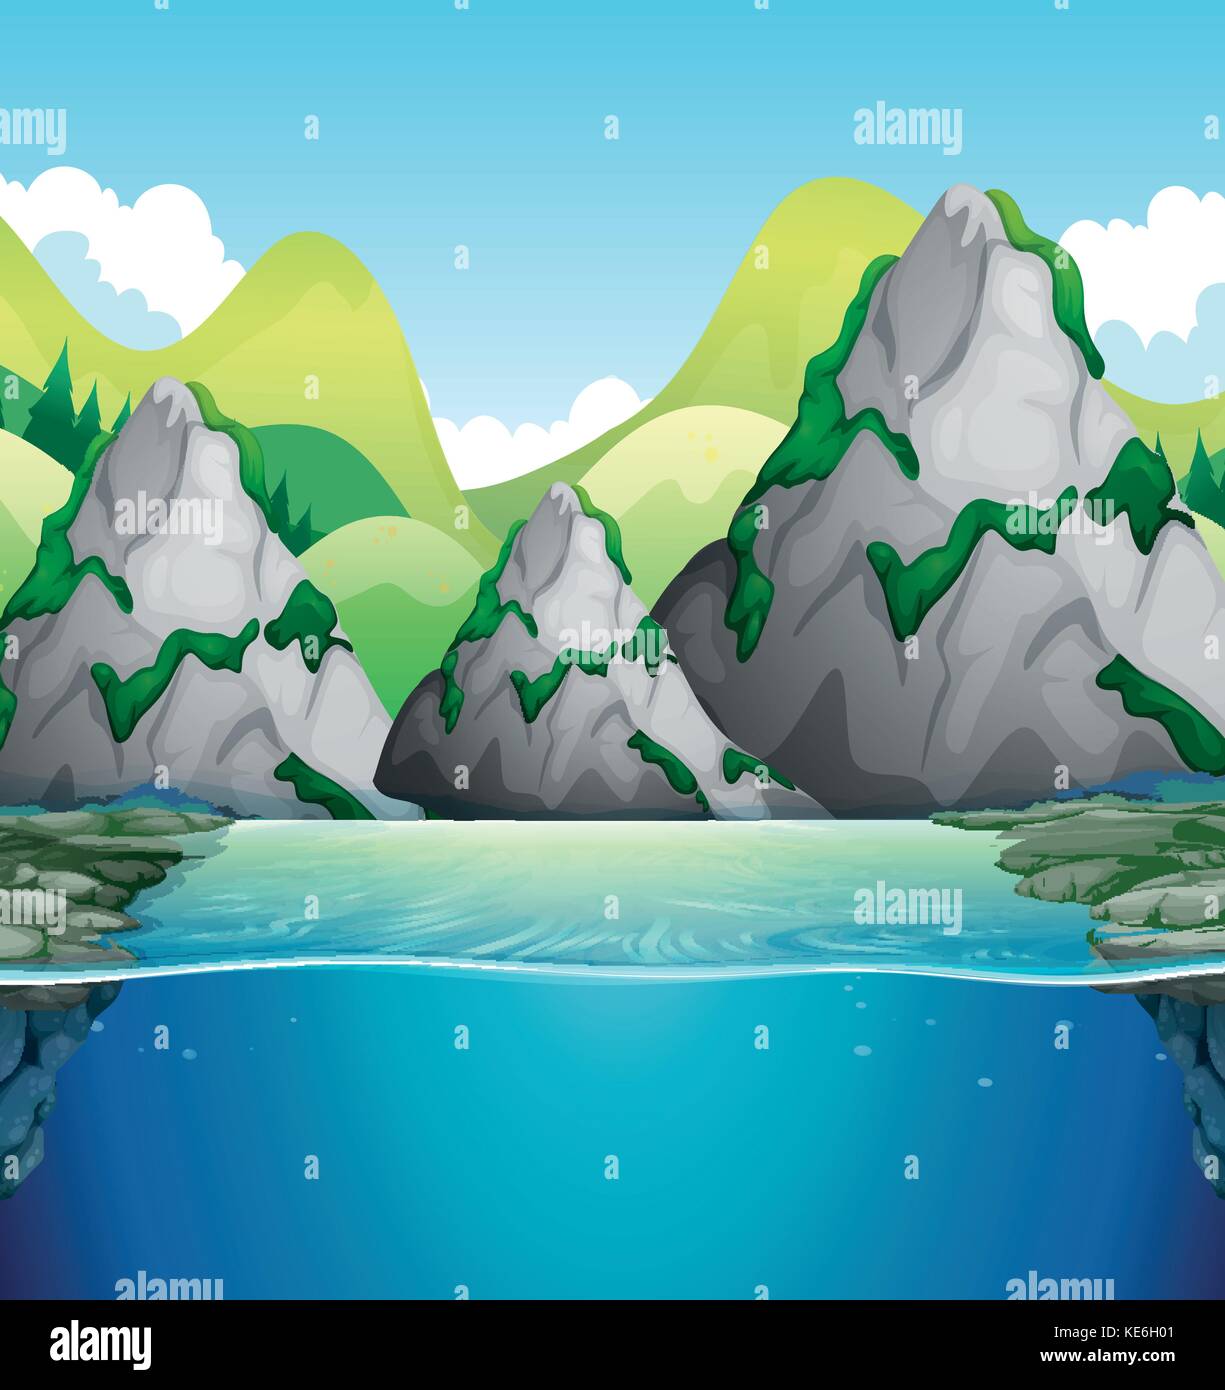 Nature scene with mountain and lake illustration Stock Vector